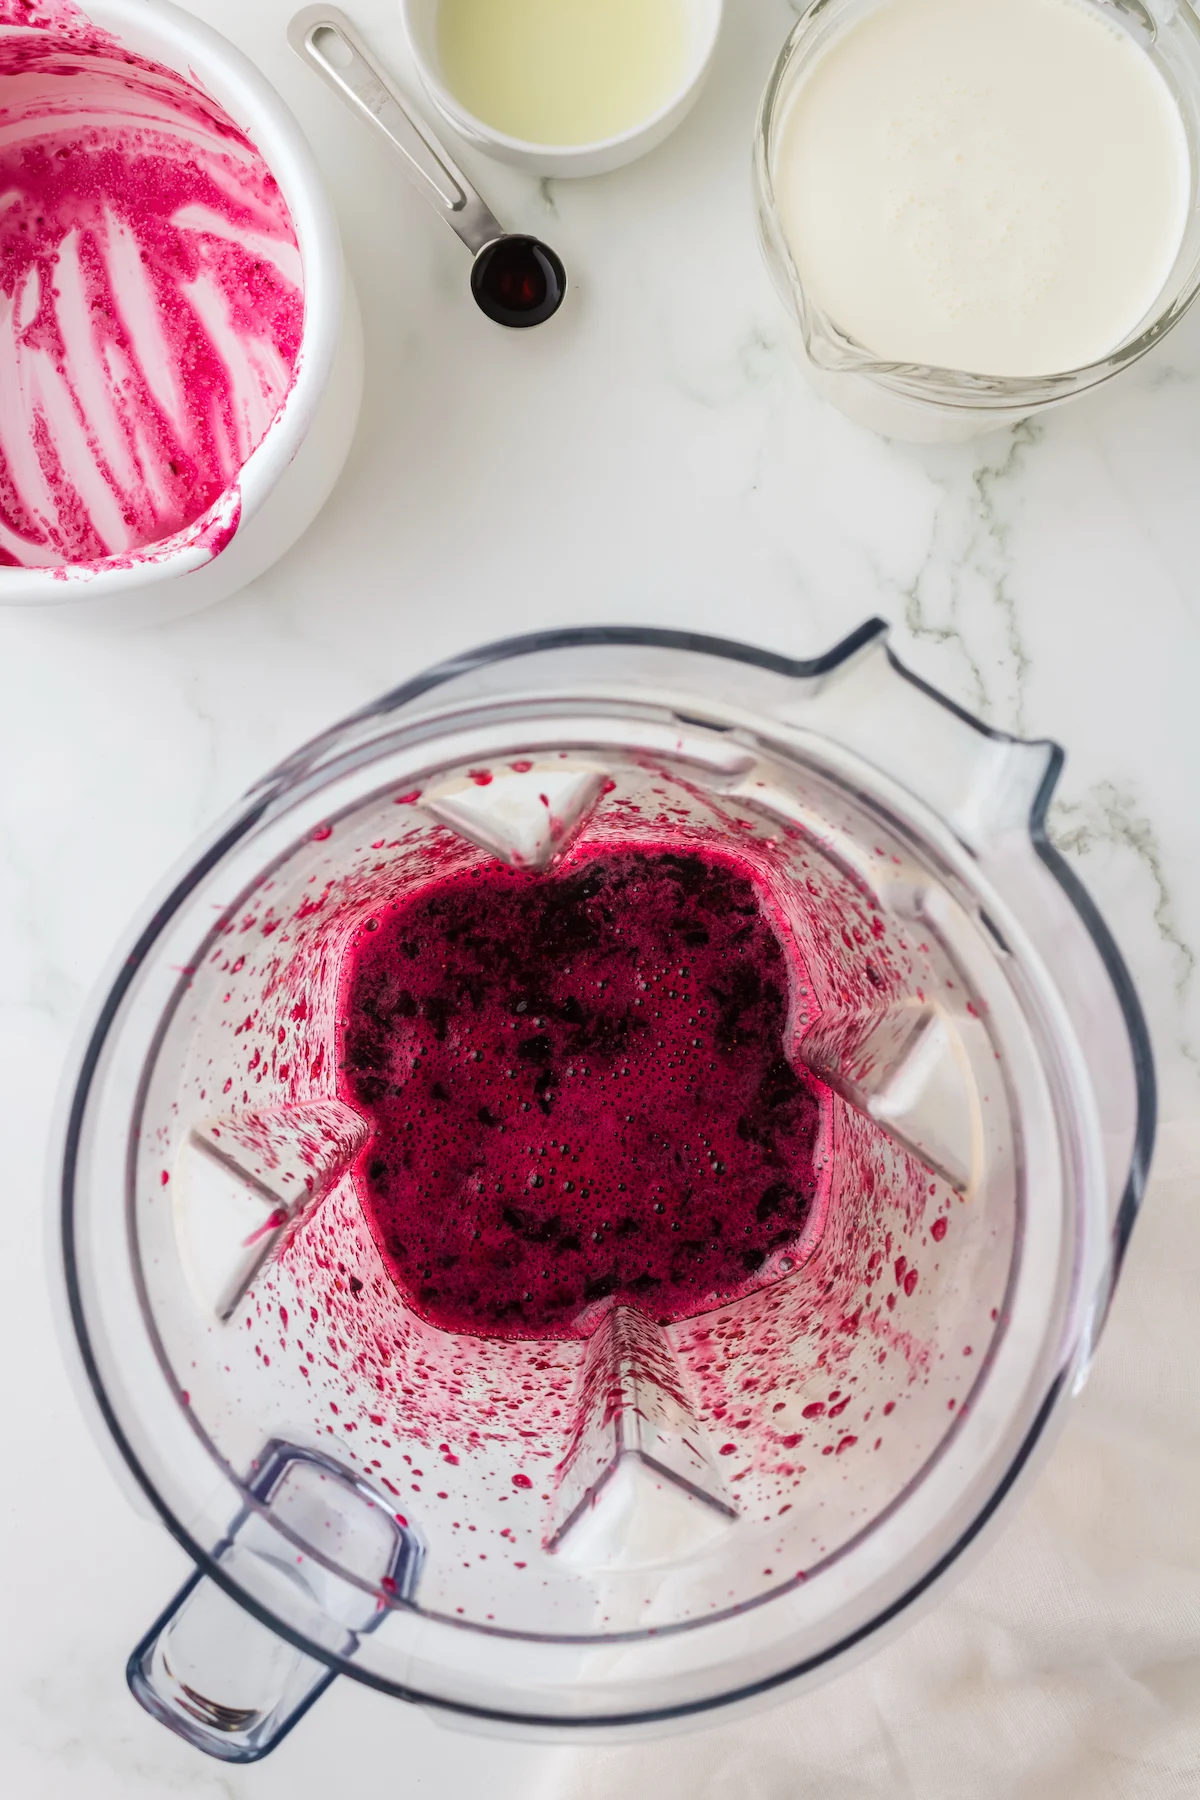 Blueberry mixture pureed in the blender